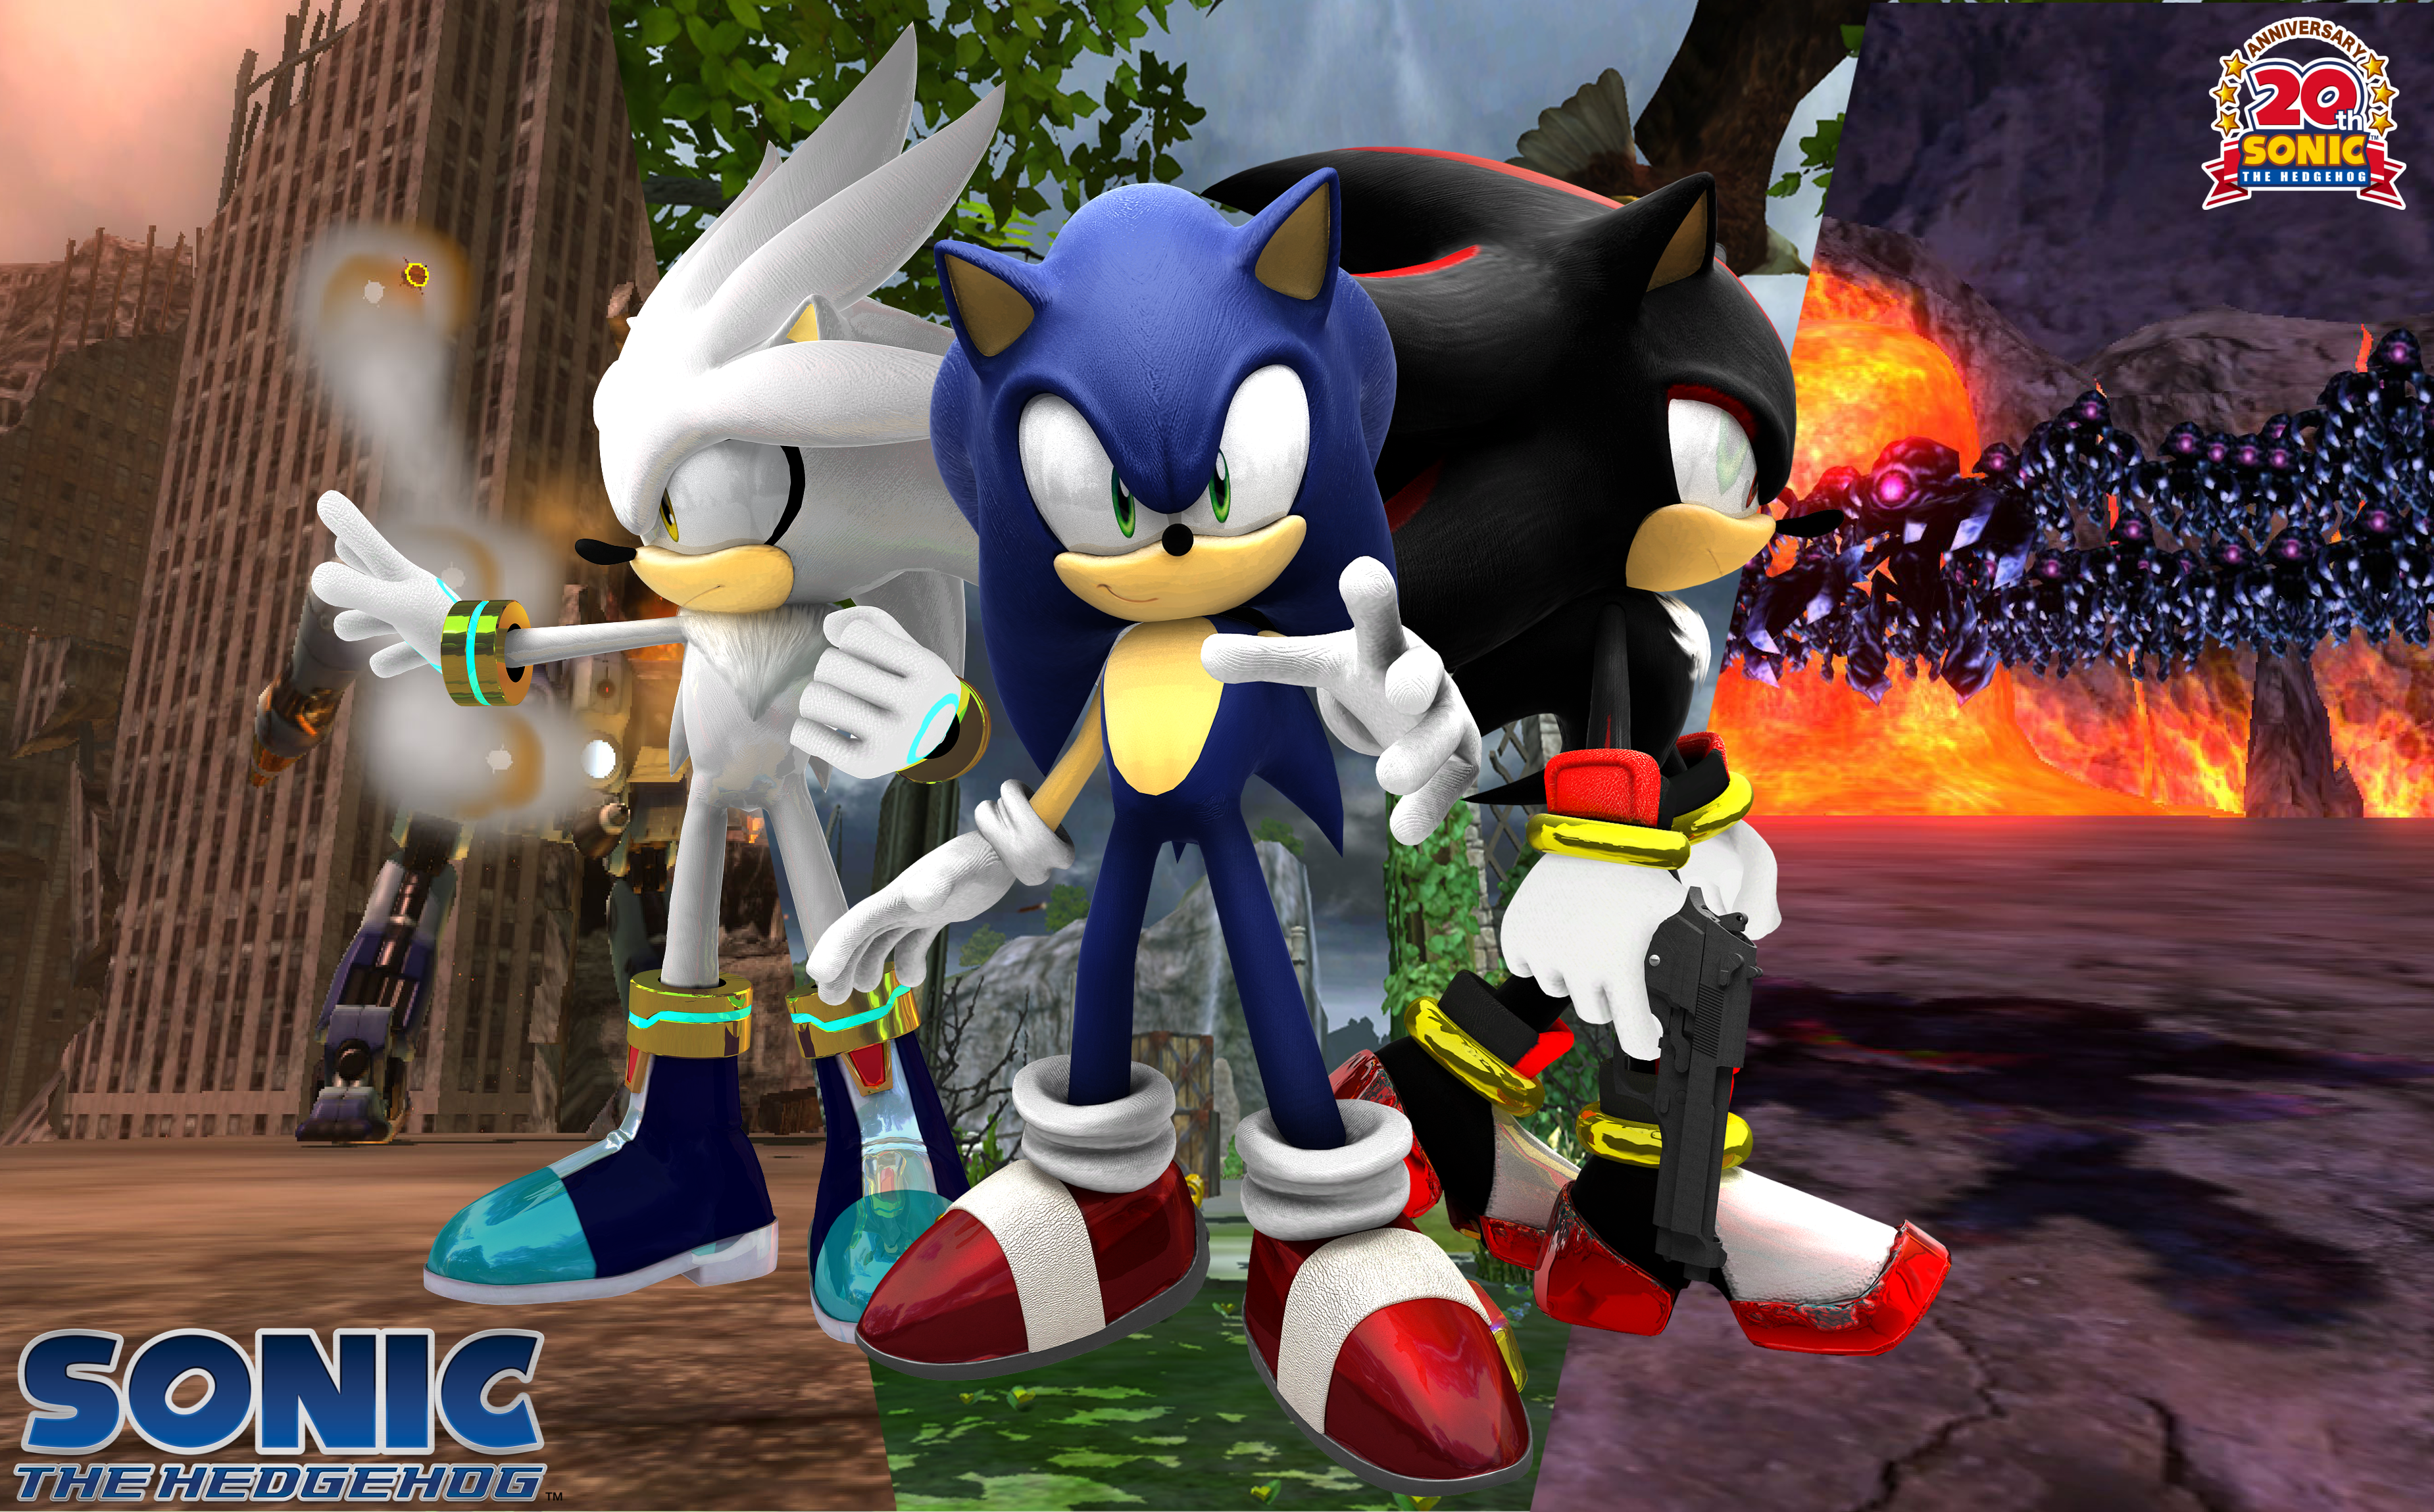 Sonic Shadow and Silver images pastpresent and future wallpaper